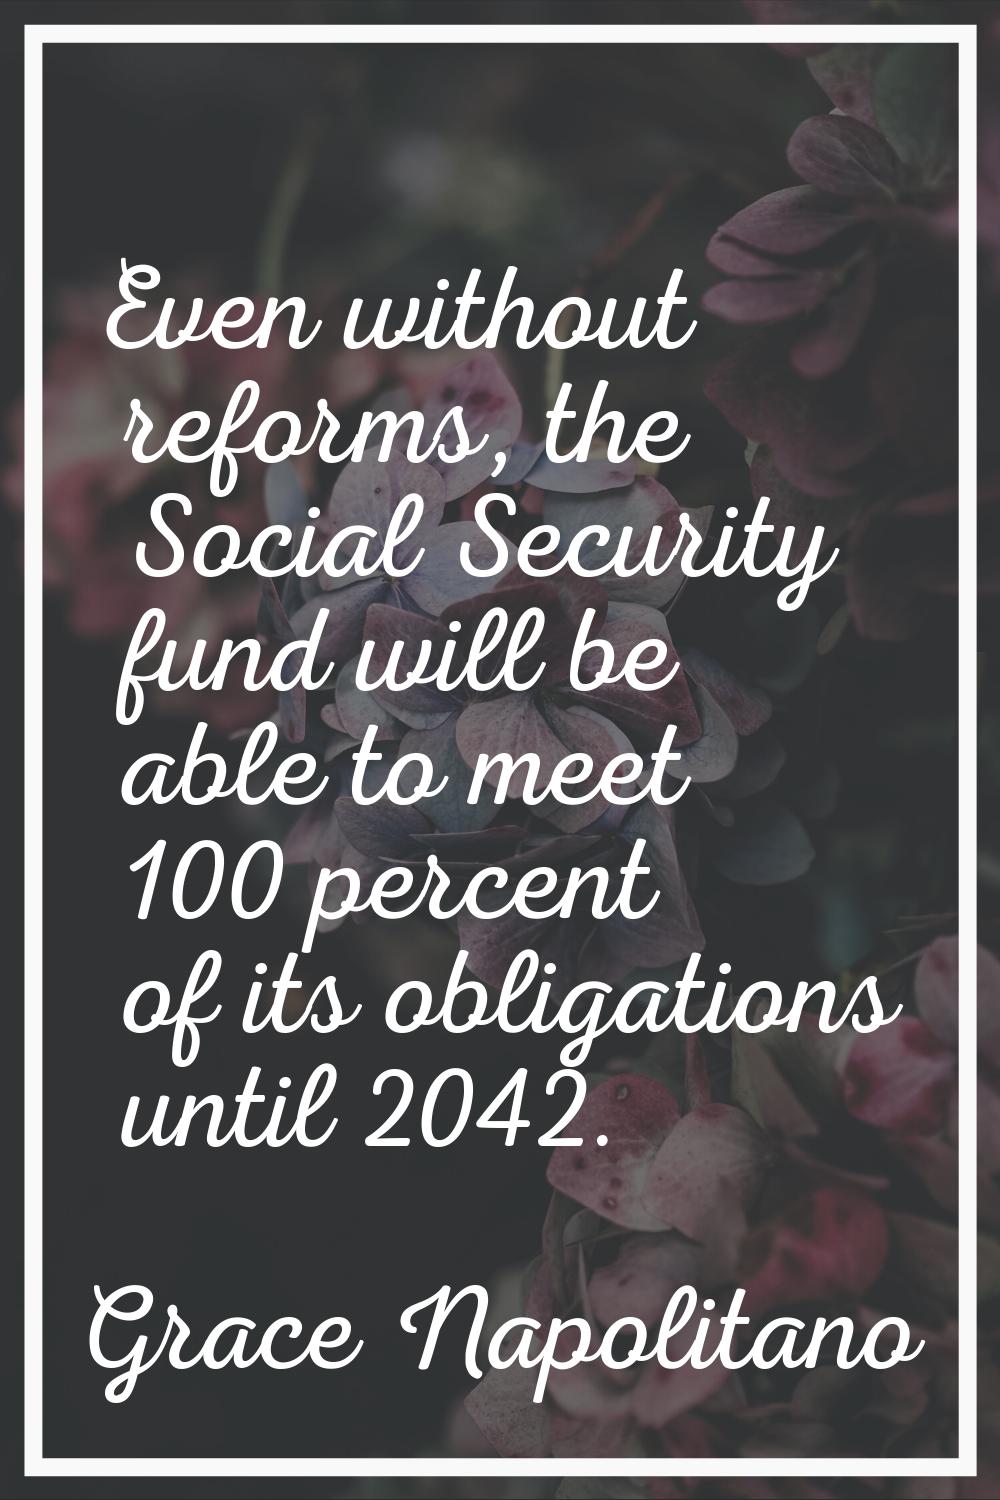 Even without reforms, the Social Security fund will be able to meet 100 percent of its obligations 